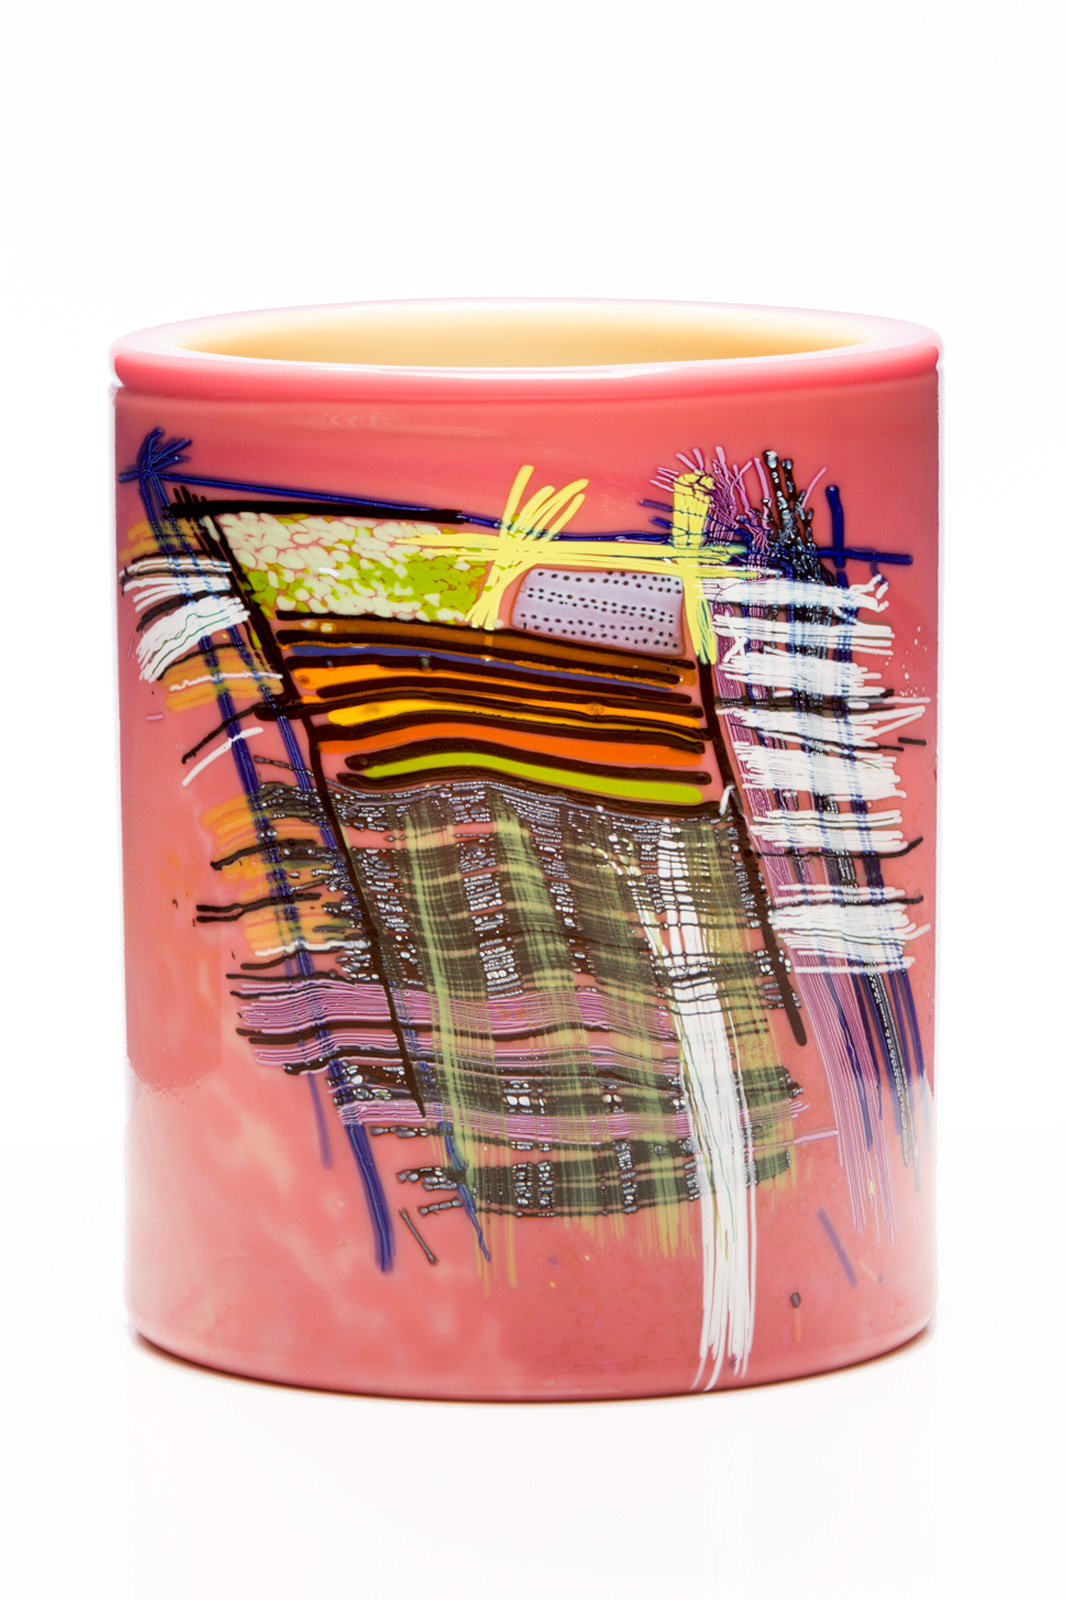 Dale Chihuly, Peach Cylinder with Indian Blanket Drawing, 2016